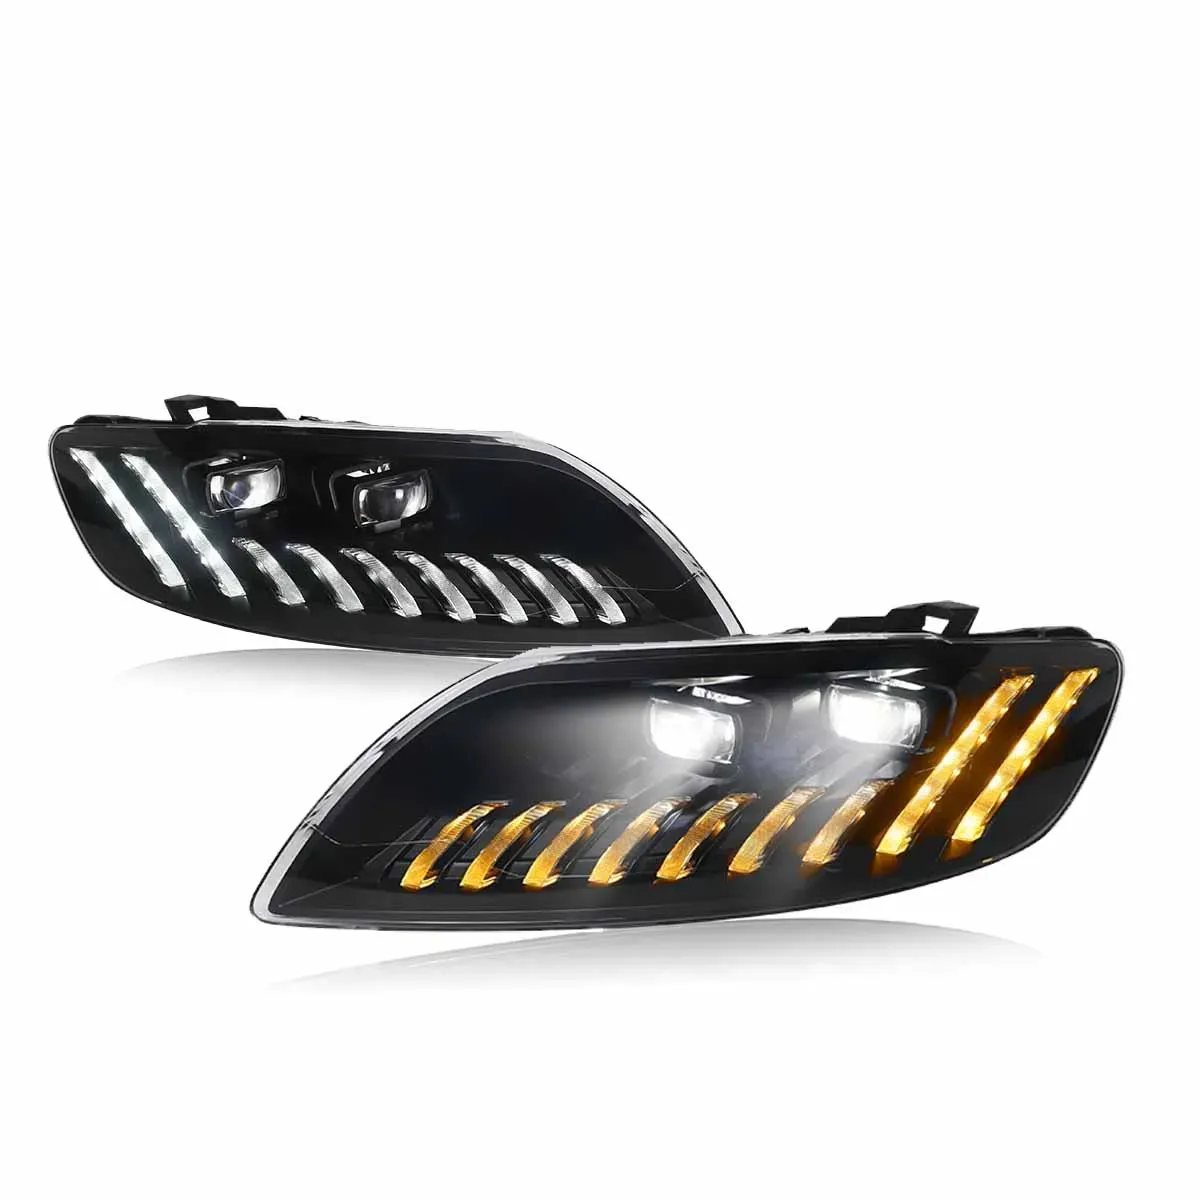 Headlight For audi Q7 head lamp headlight 2006-2015 Upgrade to Q8 style front lamp with dynamic Headlight Q7